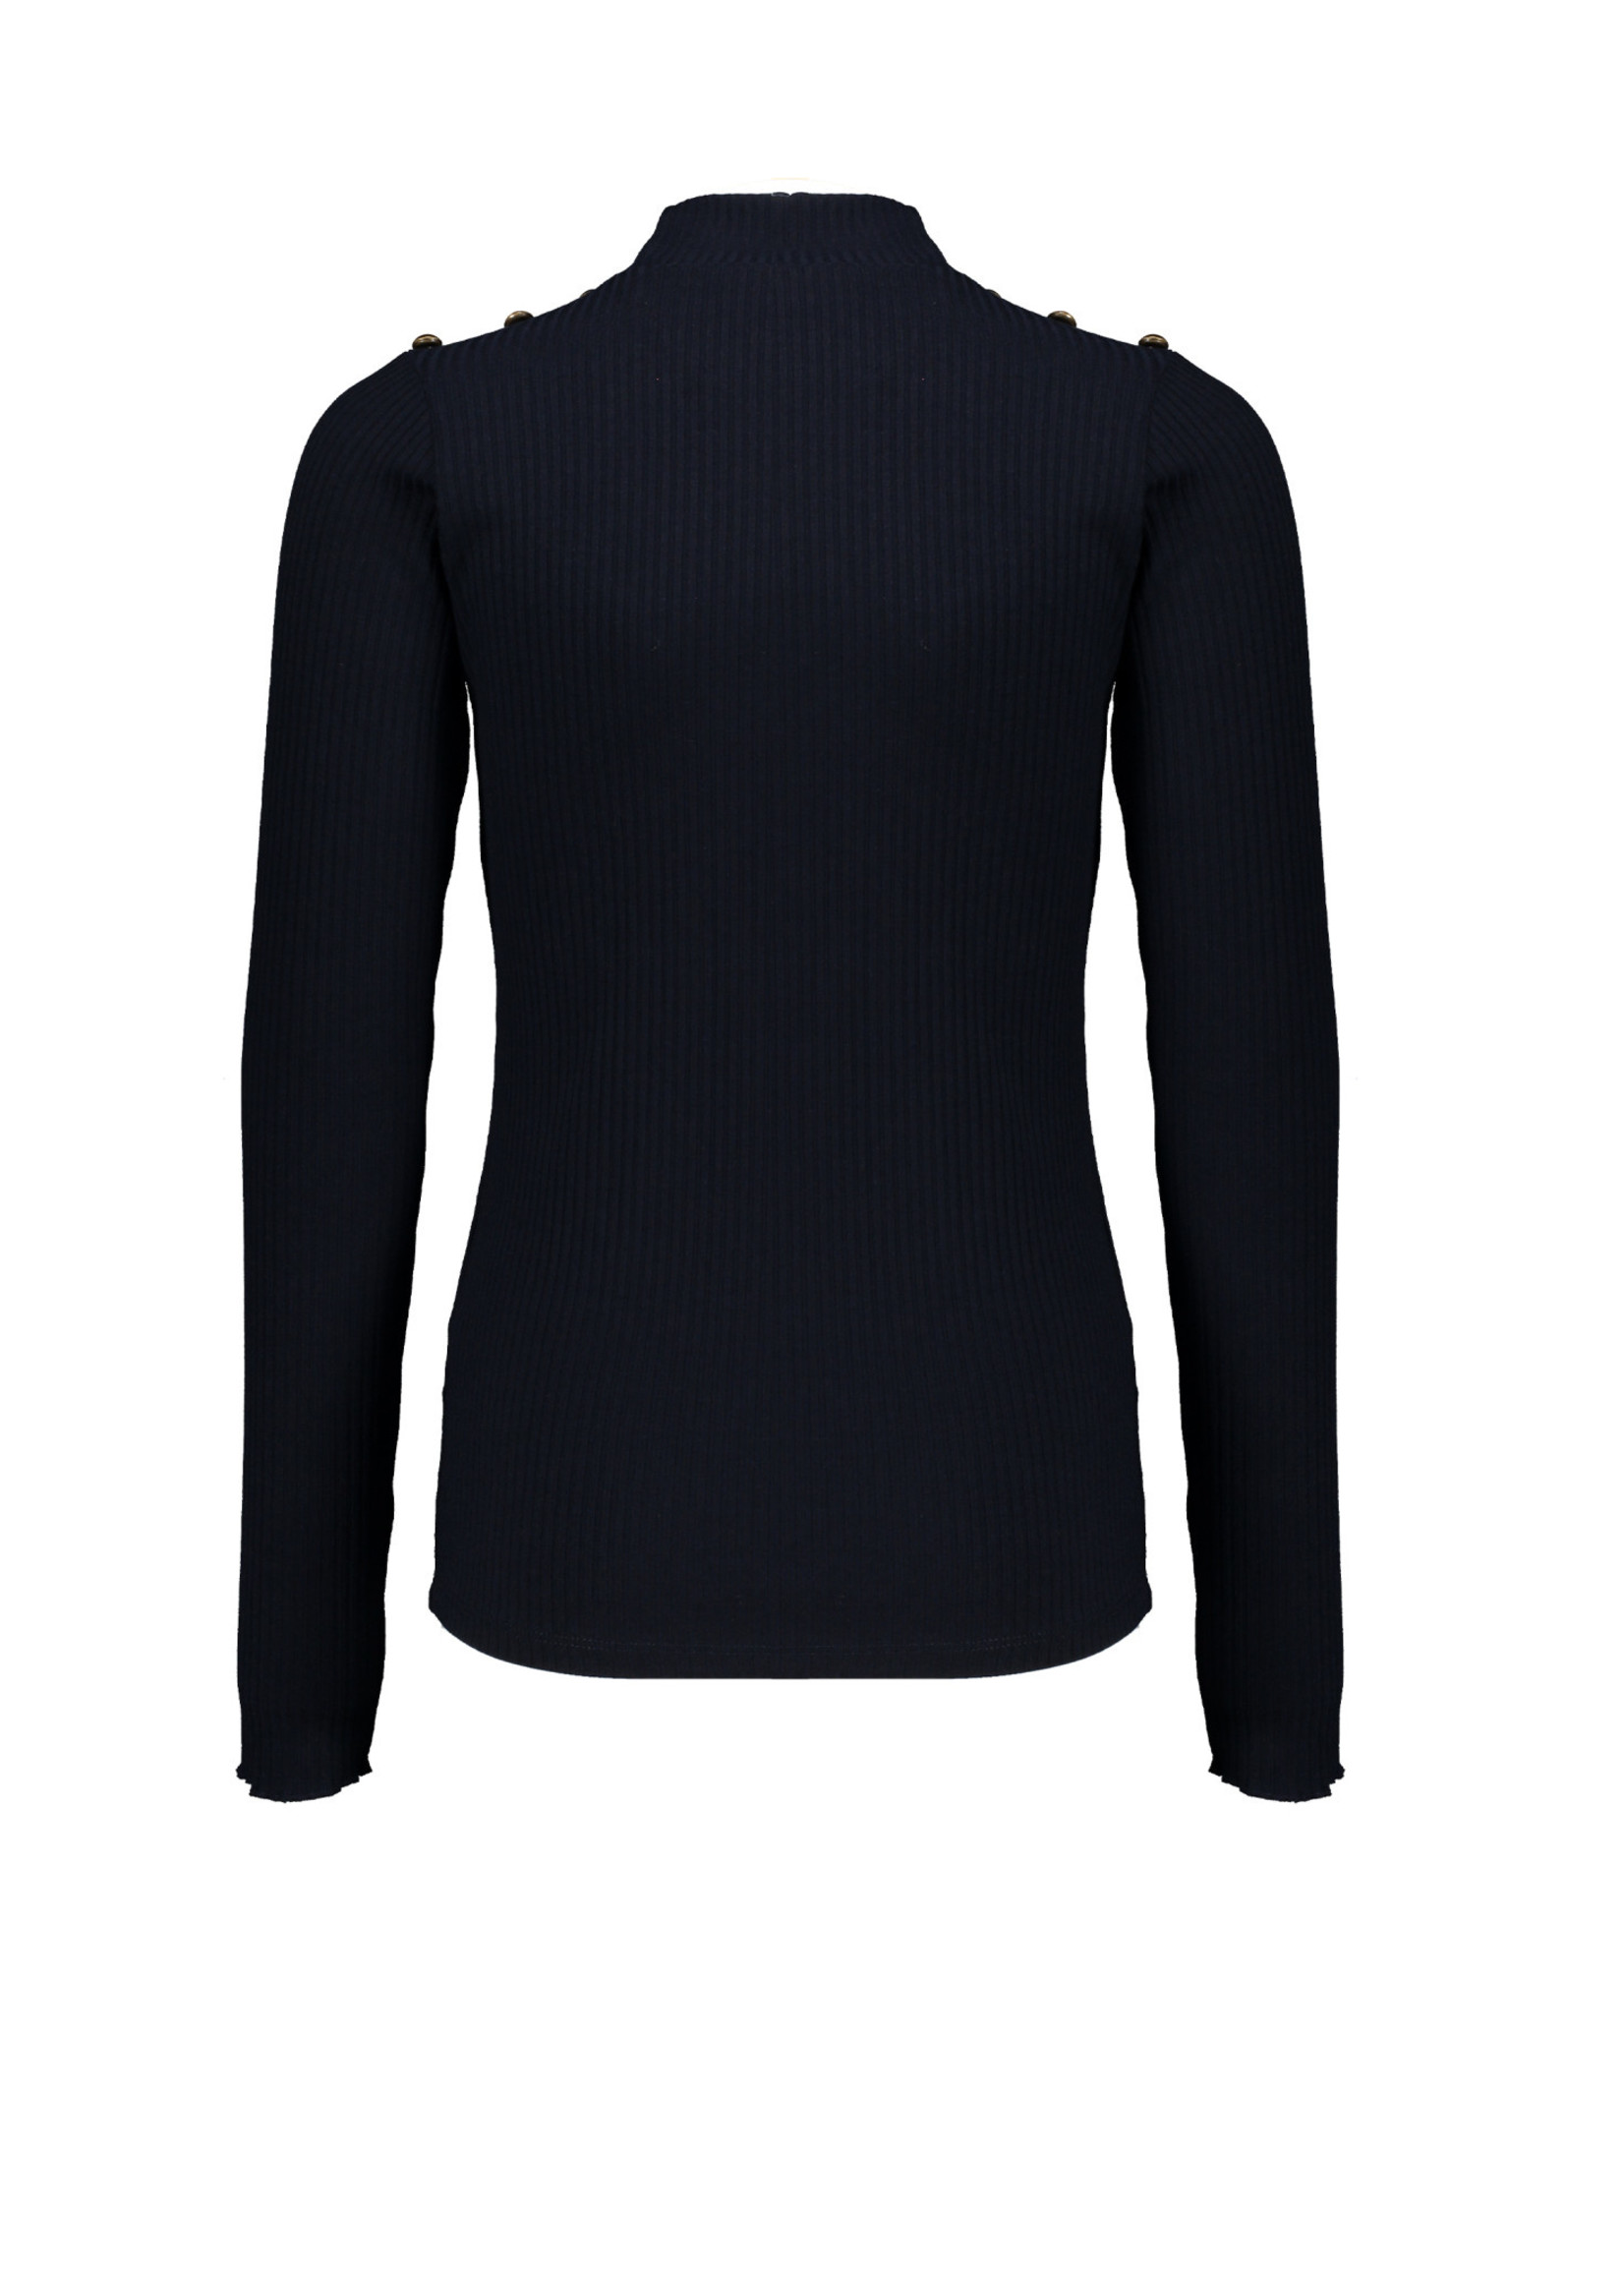 Nobell Nobell Kolet rib turtle neck tshirt with fancy buttons at shoulder Q008-3400 Grey Navy